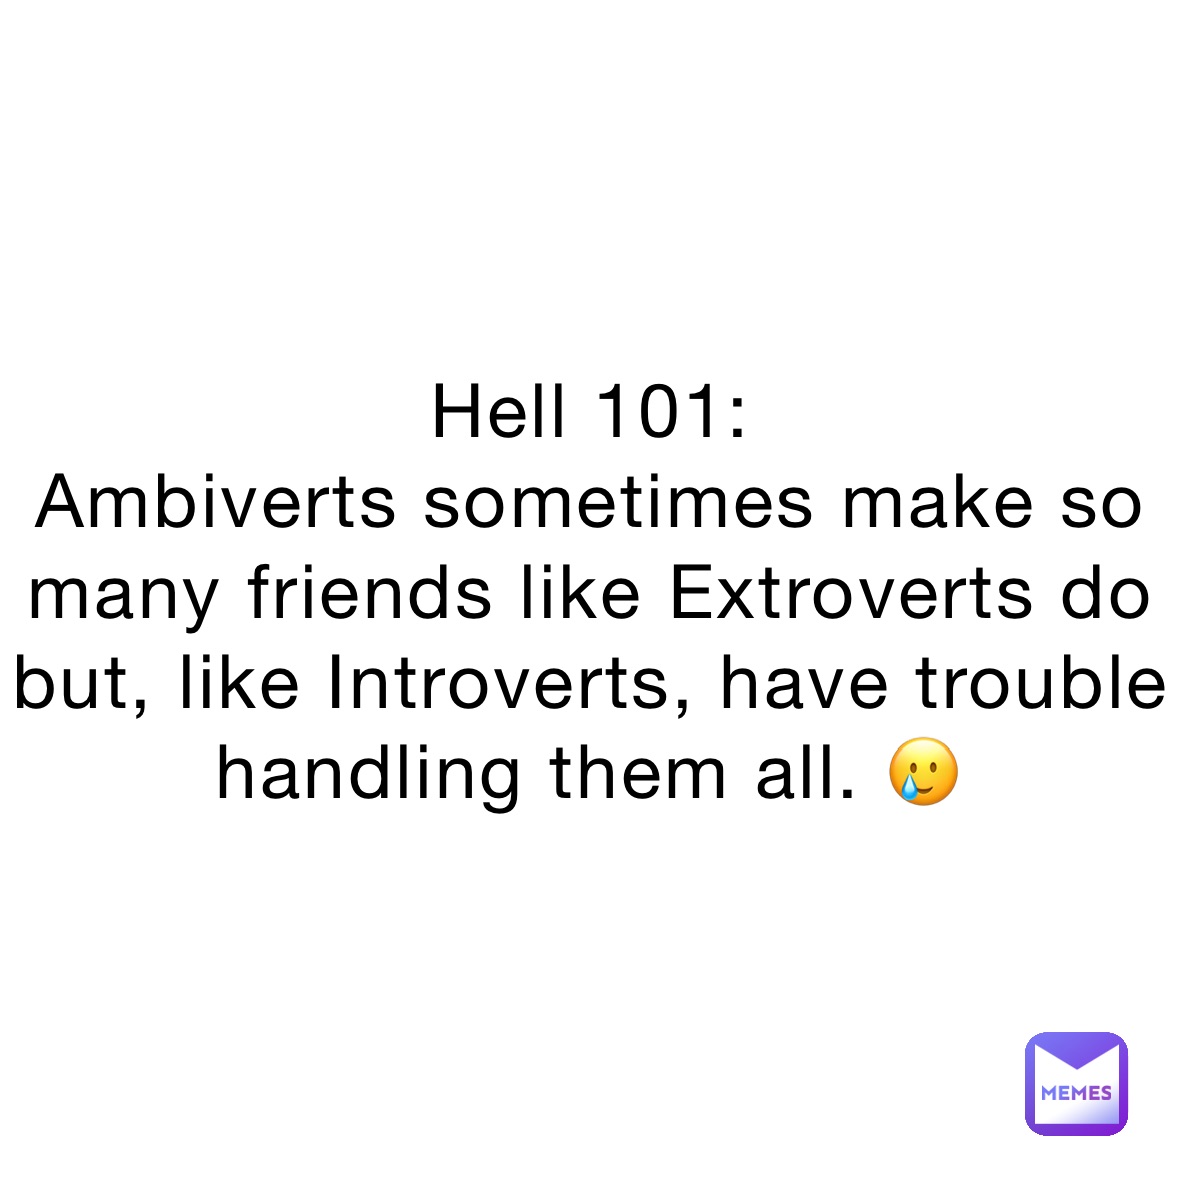 Hell 101:
Ambiverts sometimes make so many friends like Extroverts do but, like Introverts, have trouble handling them all. 🥲